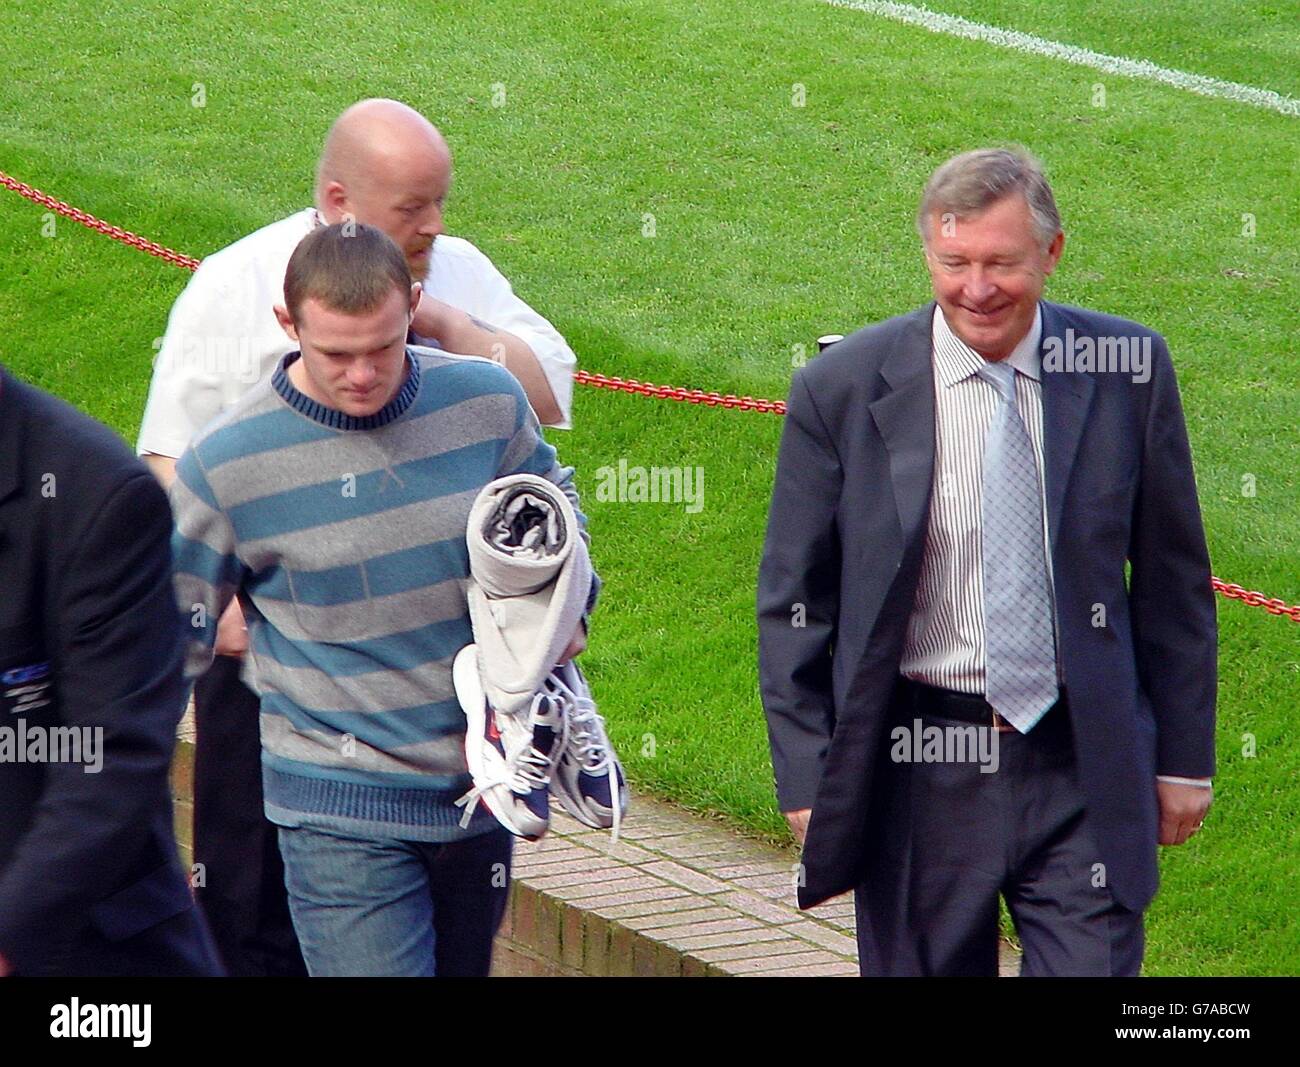 Manchester United's new signing Wayne Rooney (left) with manager Sir Alex Ferguson (right) at Old Trafford, Manchester. Stock Photo